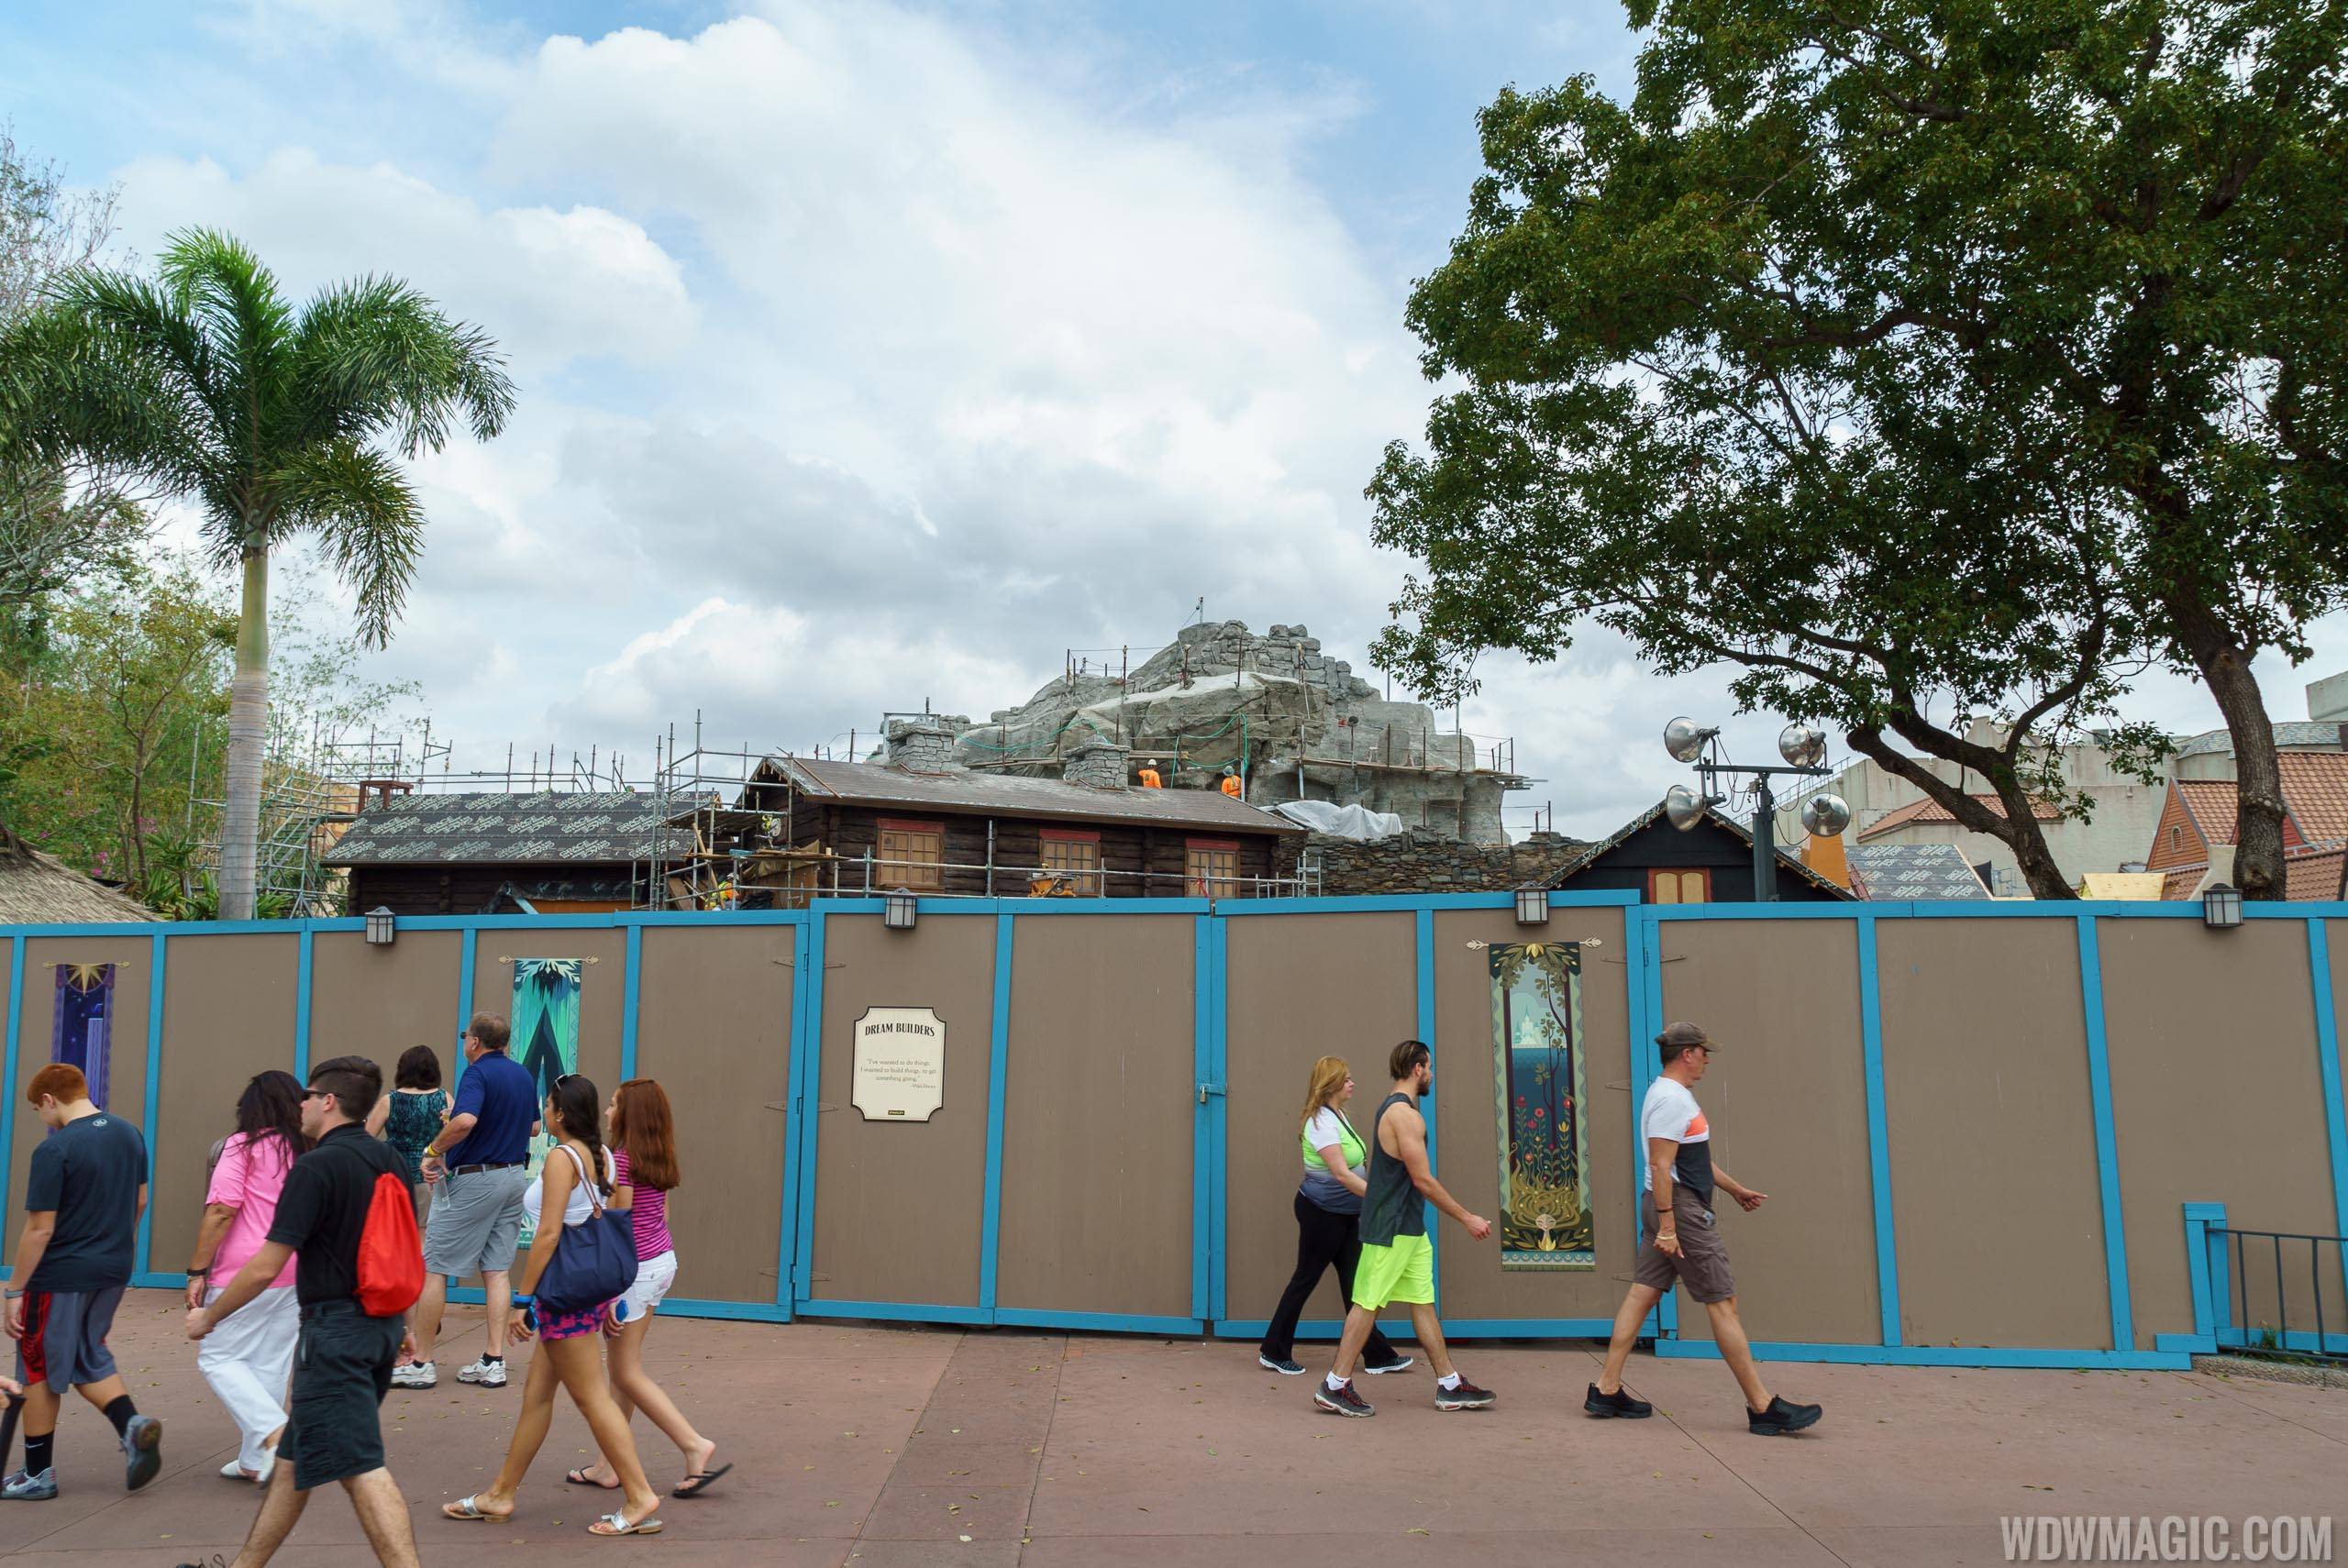 PHOTOS - Royal Sommerhus Frozen meet and greet construction at Epcot's Norway Pavilion